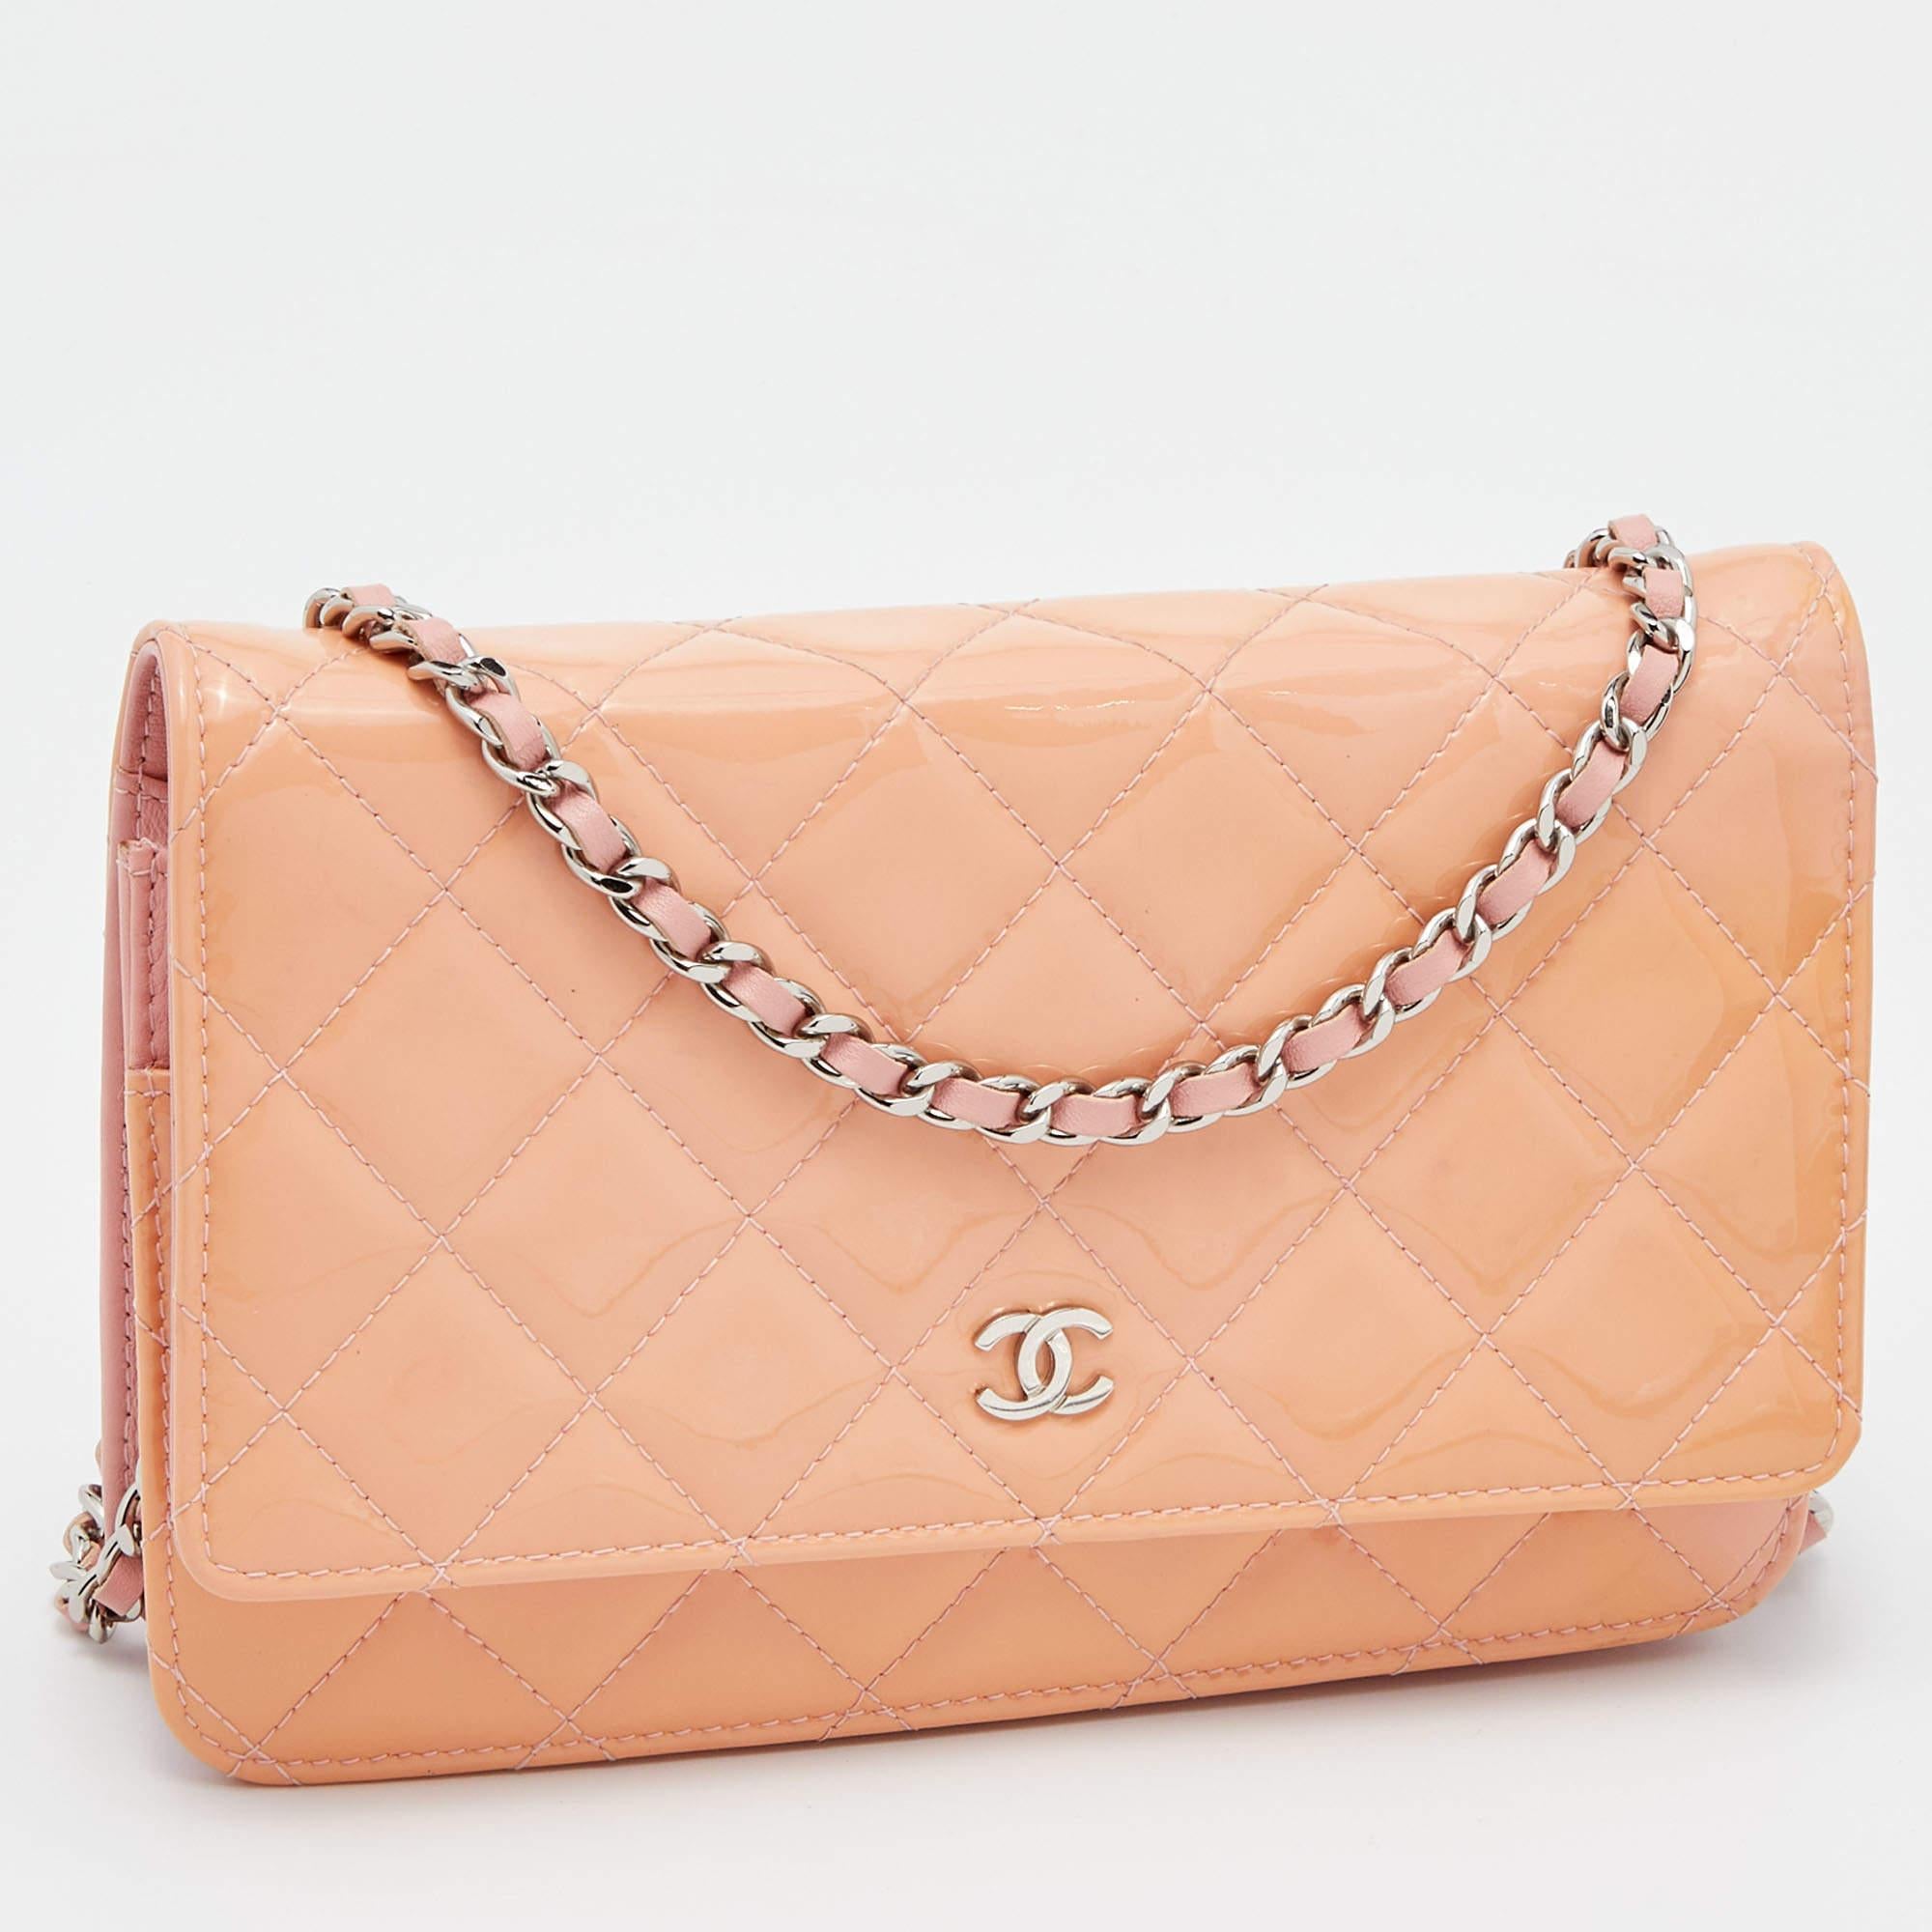 Women's Chanel Peach Quilted Patent Leather CC Wallet on Chain